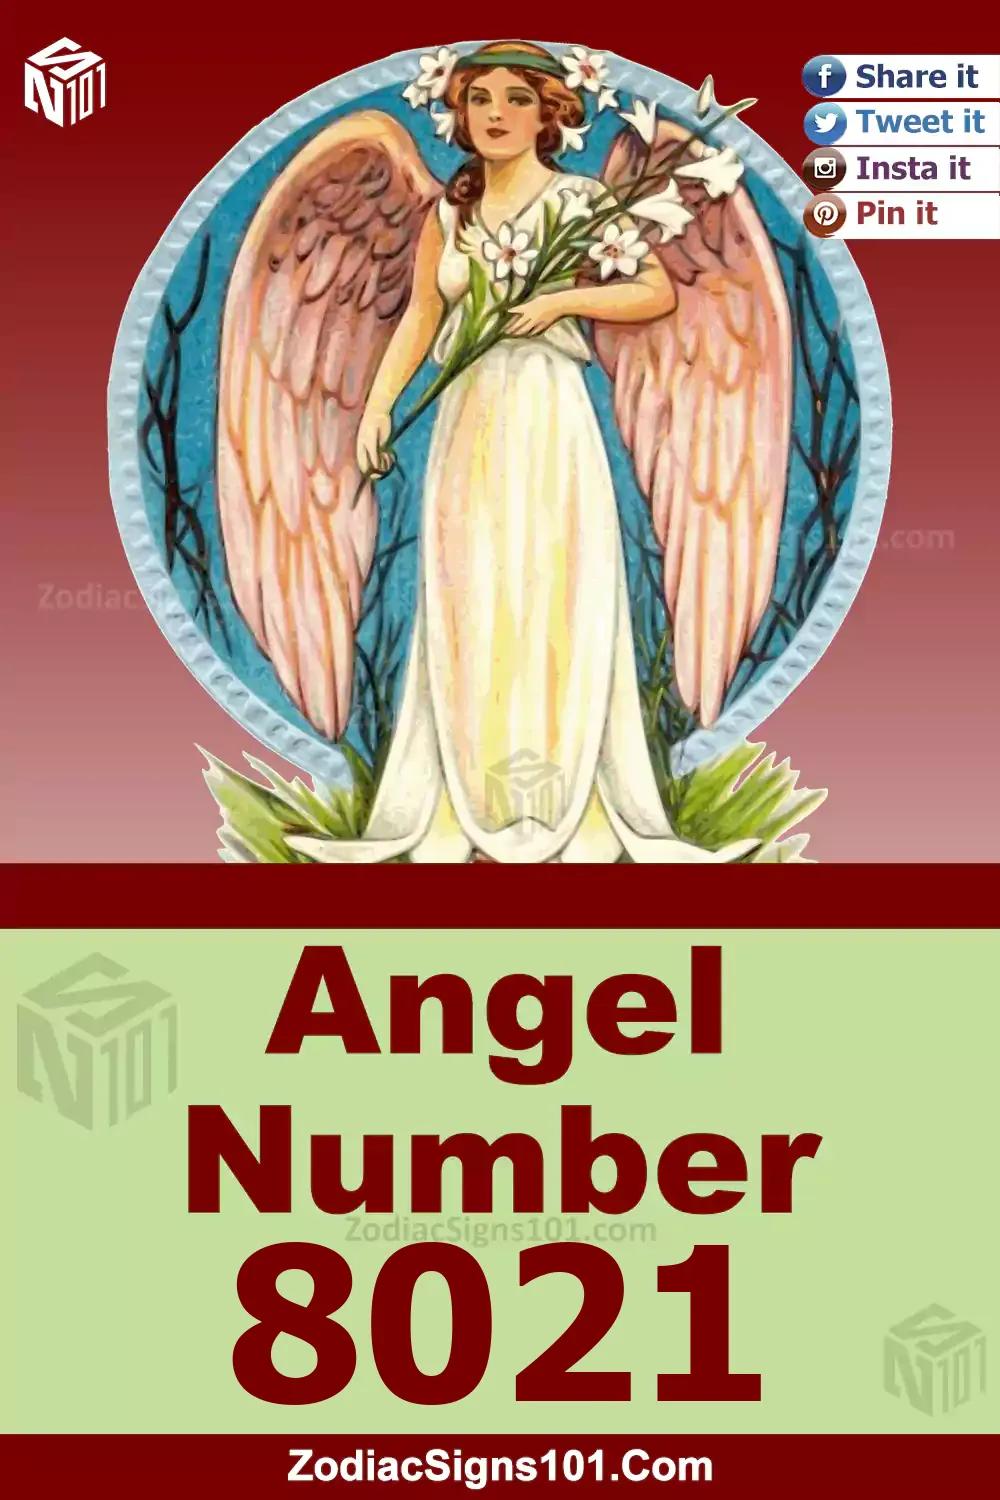 8021 Angel Number Meaning